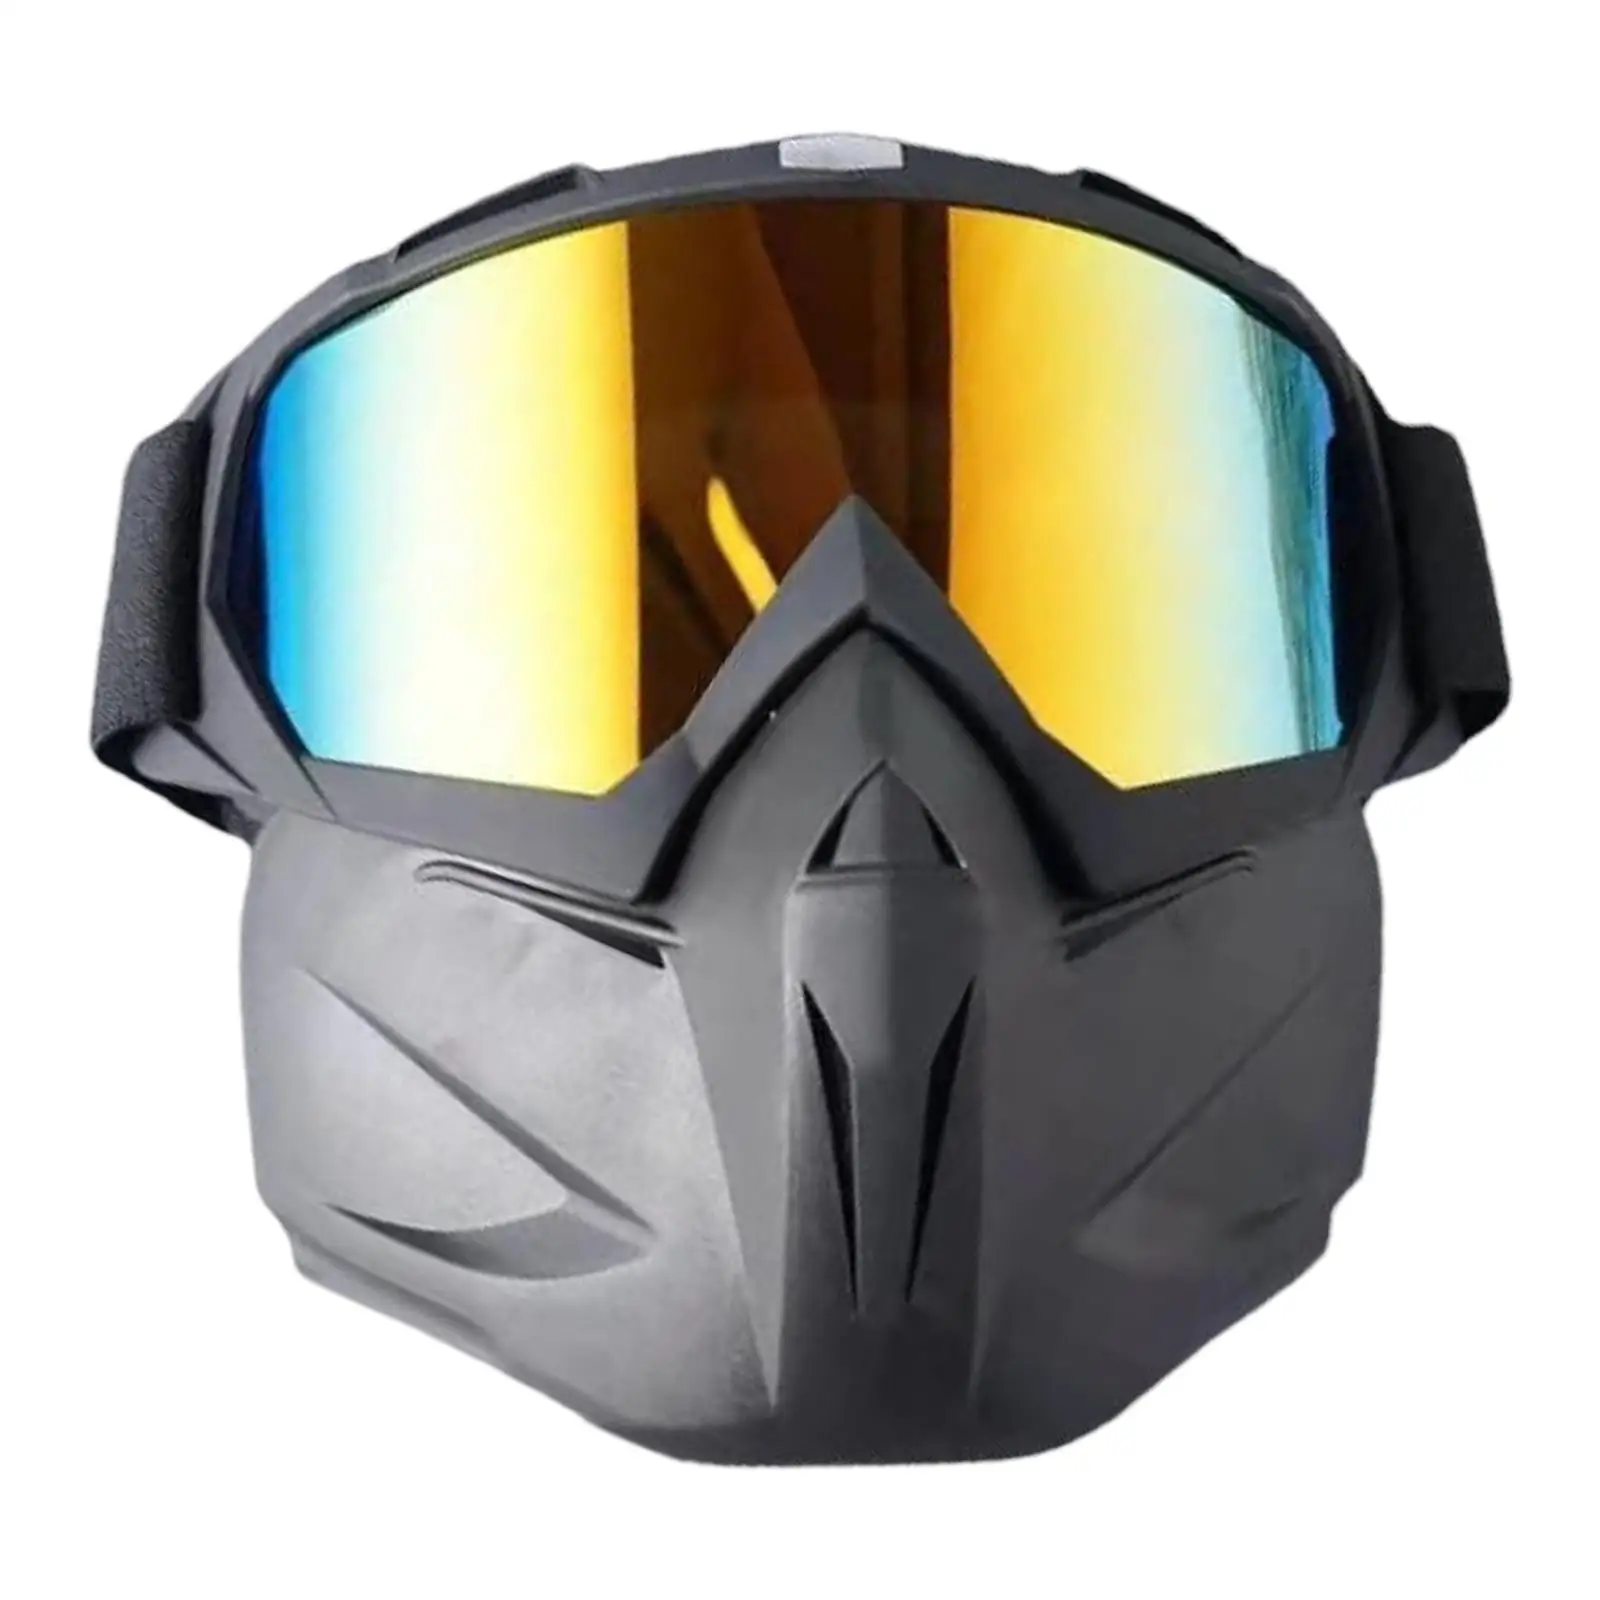 Motorcycle Goggles Mask Helmet Riding Goggles Windproof Fit for Riding Ski